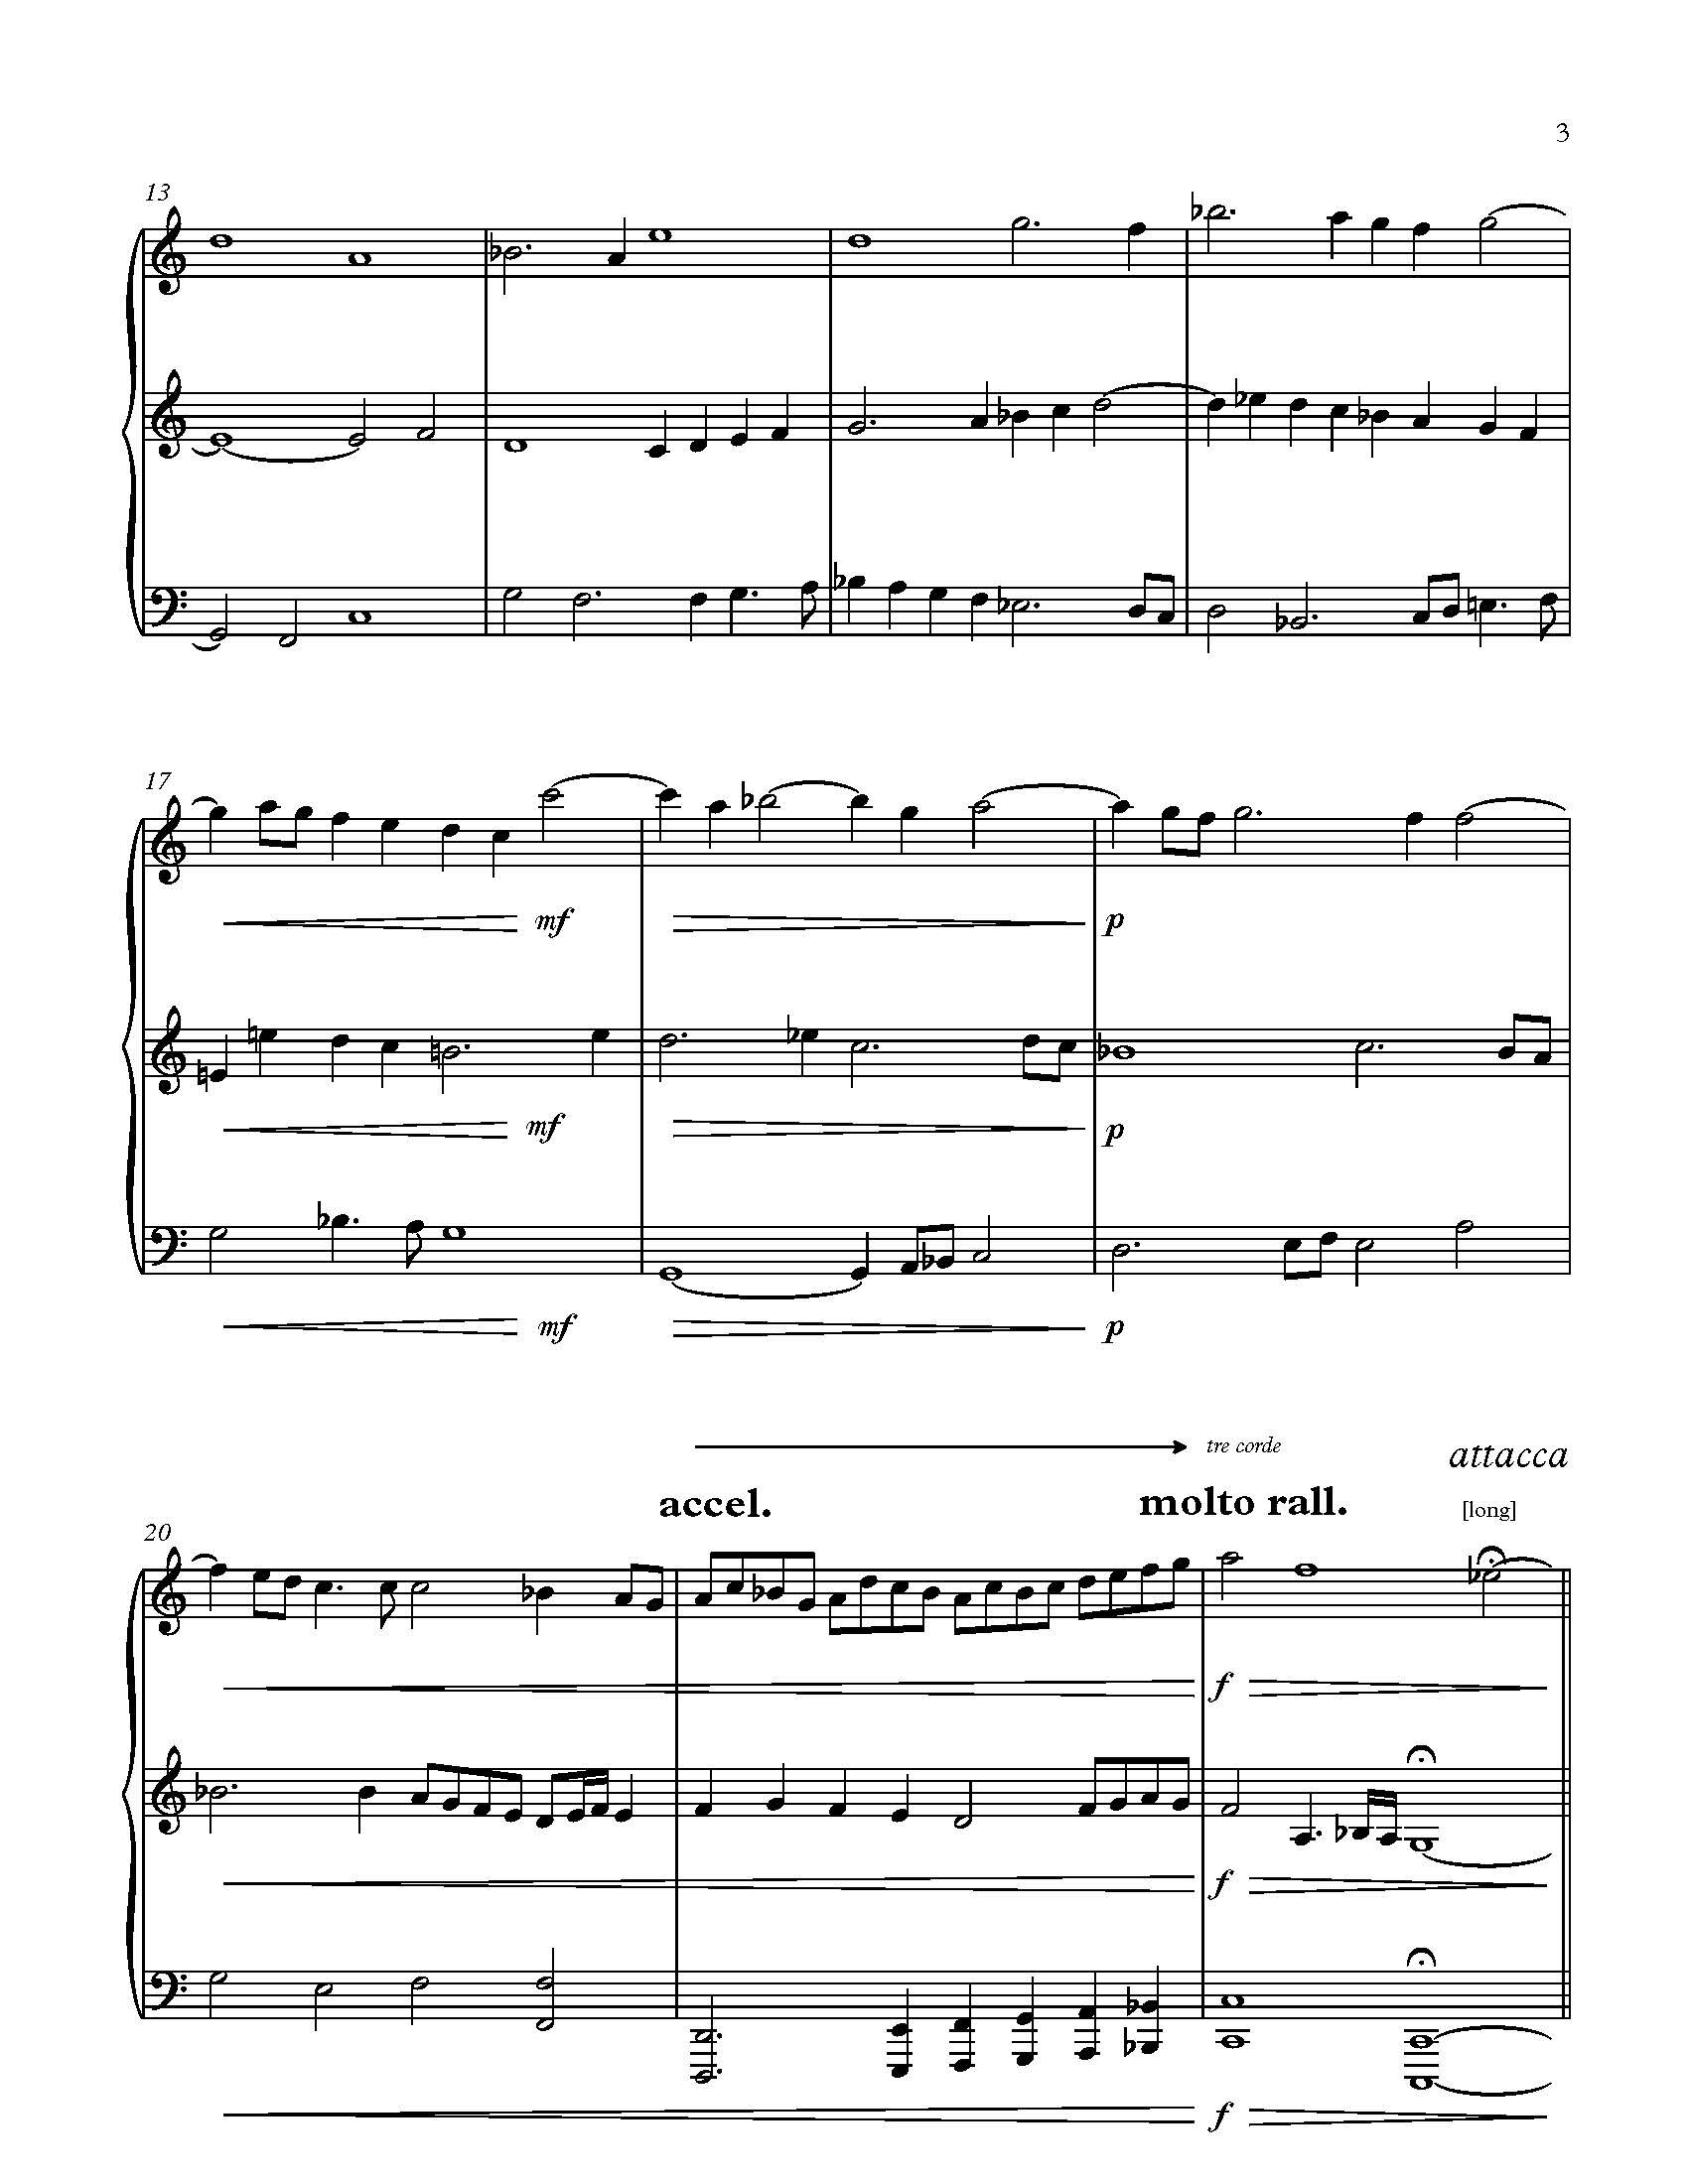 Wilfred Owen at the Gates - Complete Score_Page_09.jpg